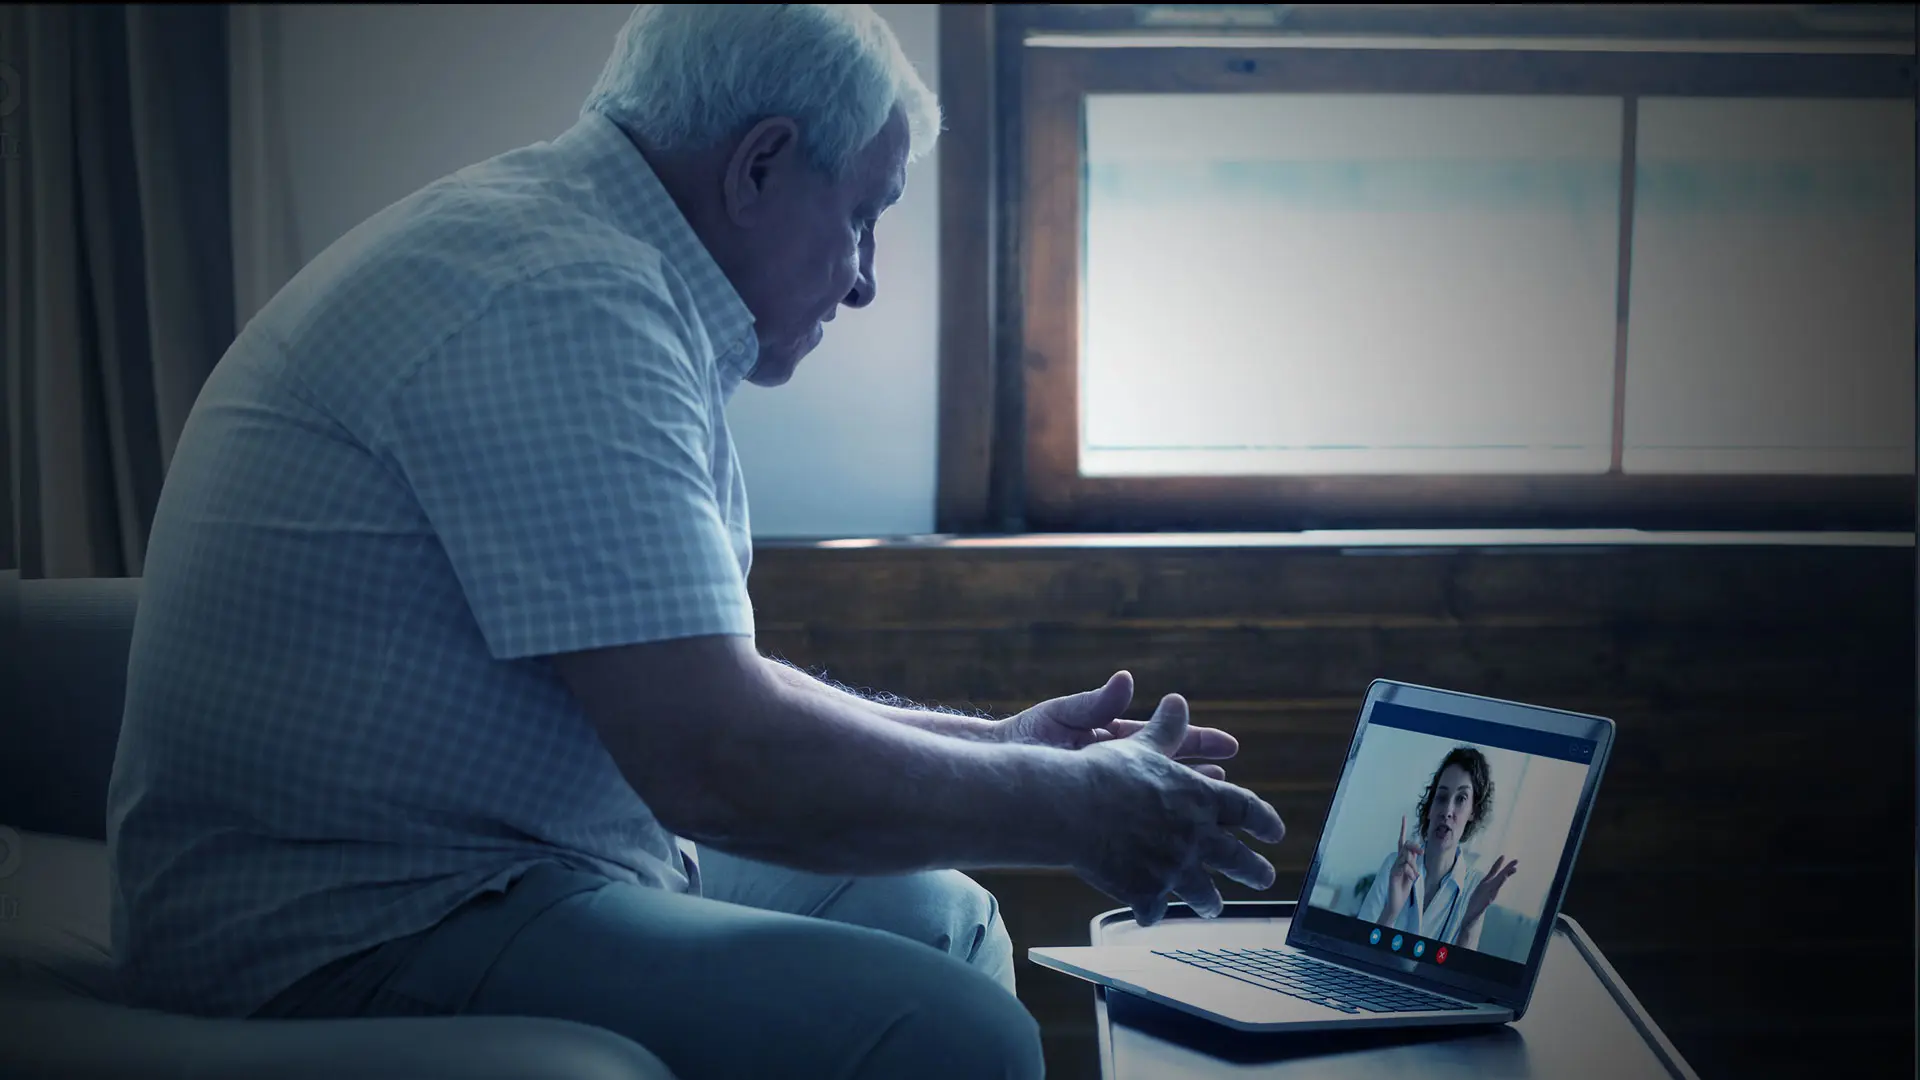 Rapid Expansion of Telemedicine to Older Adults During the Pandemic Shows the Need to Continue Expanding Access